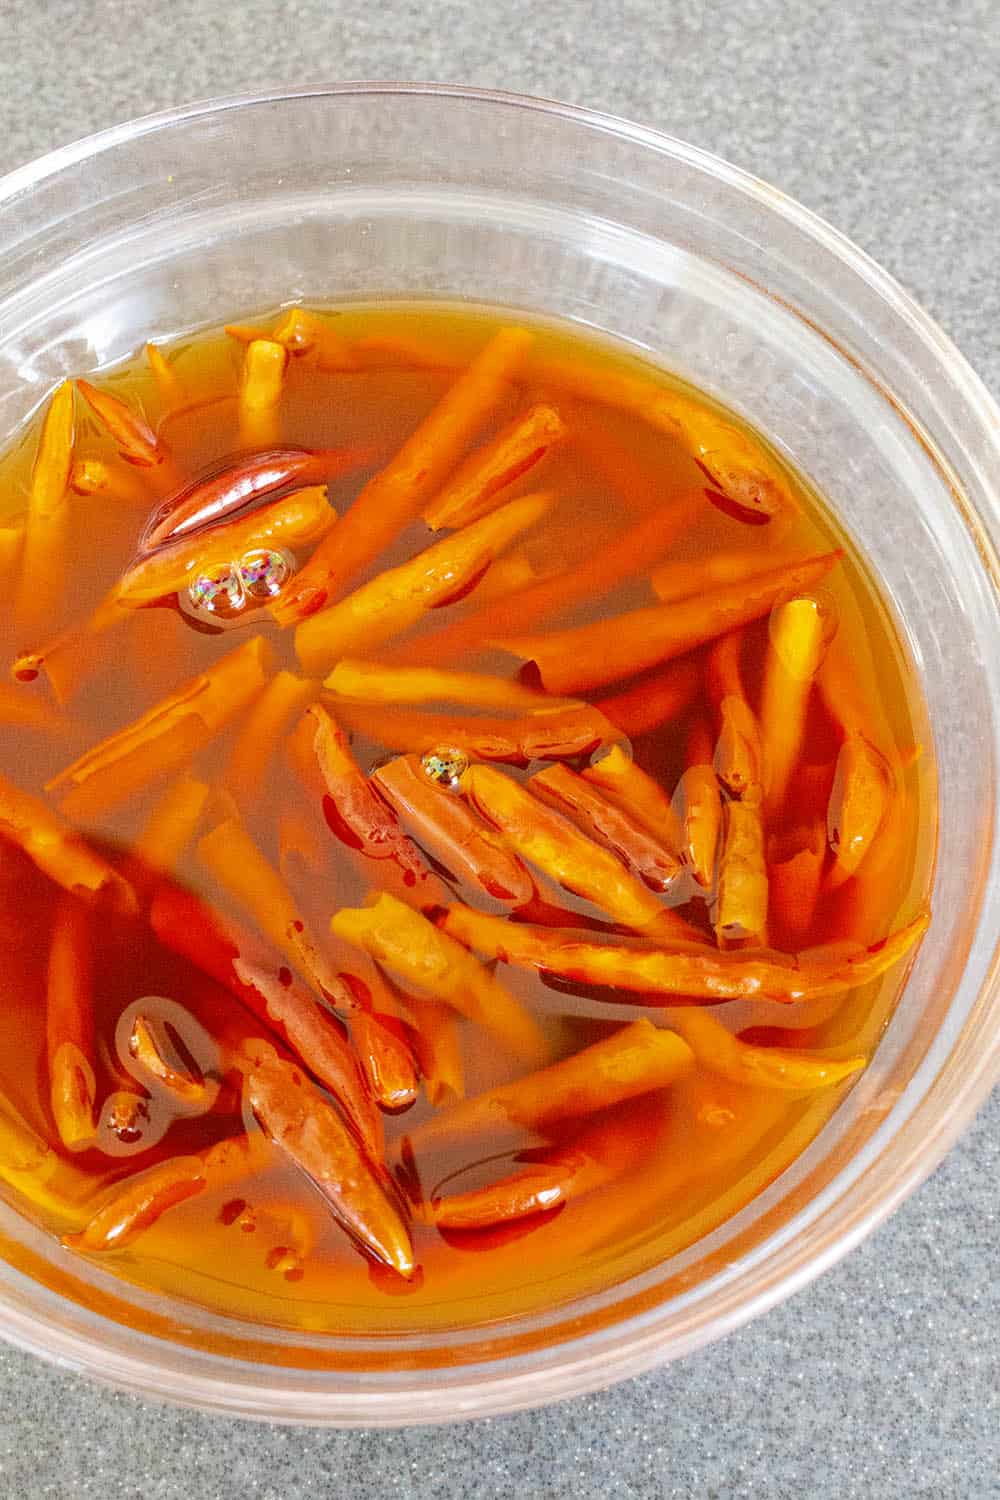 Chile de Arbol peppers soaking in a bowl of water